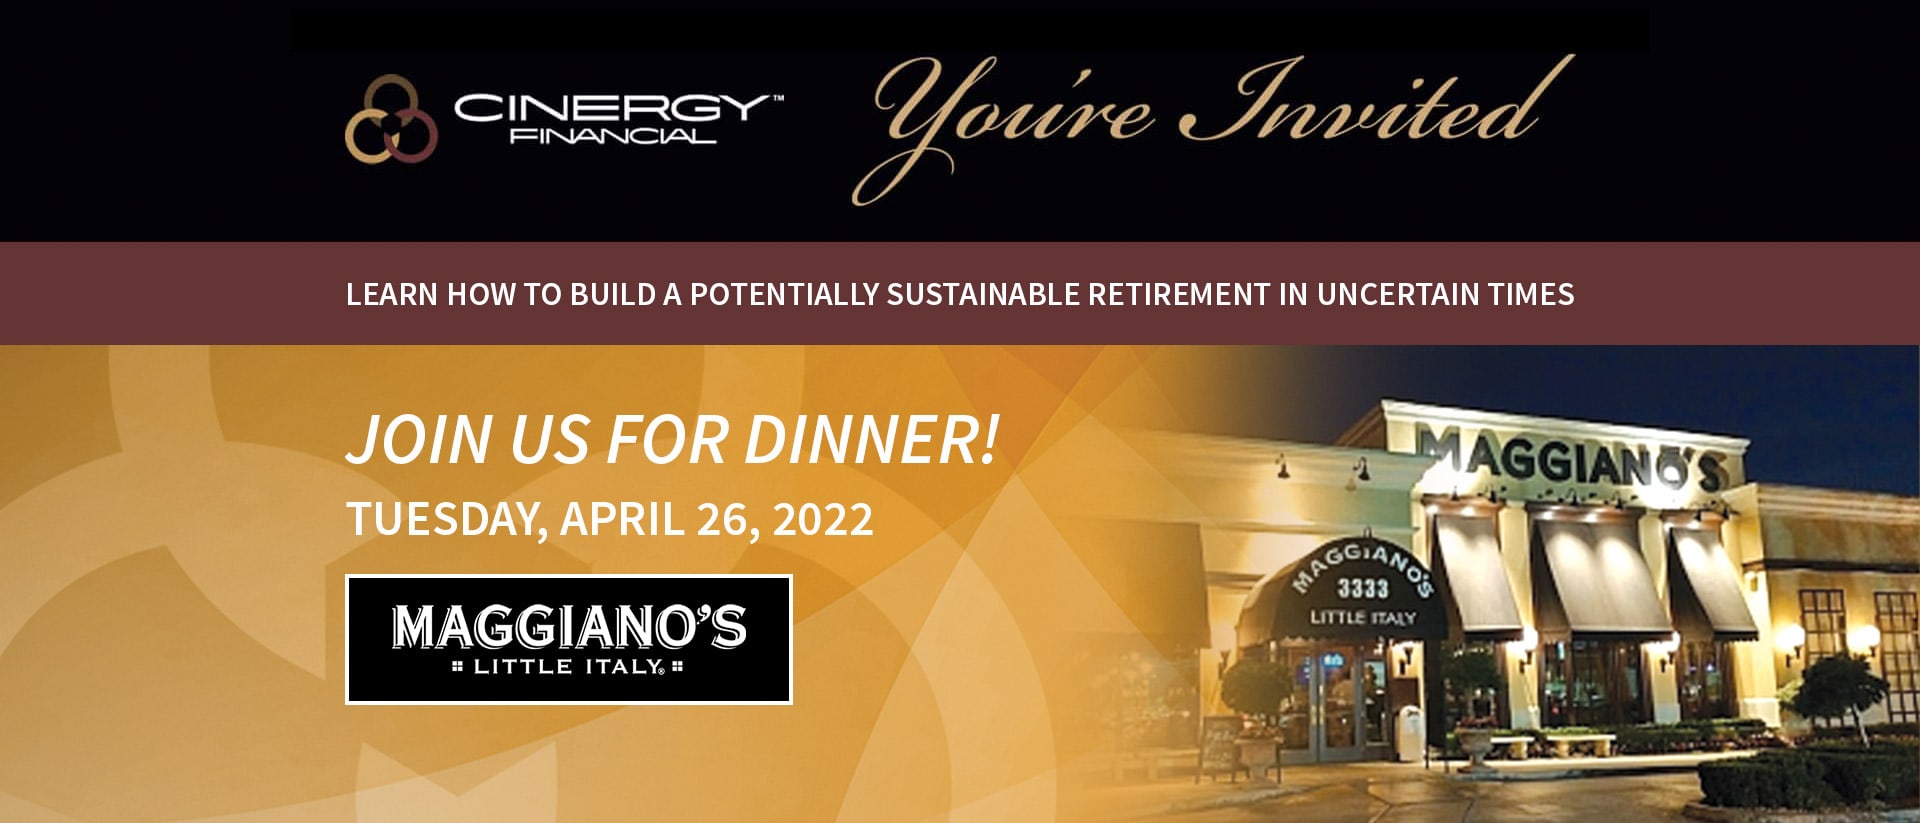 Event cinergy financial literacy maggianos 04-26-22